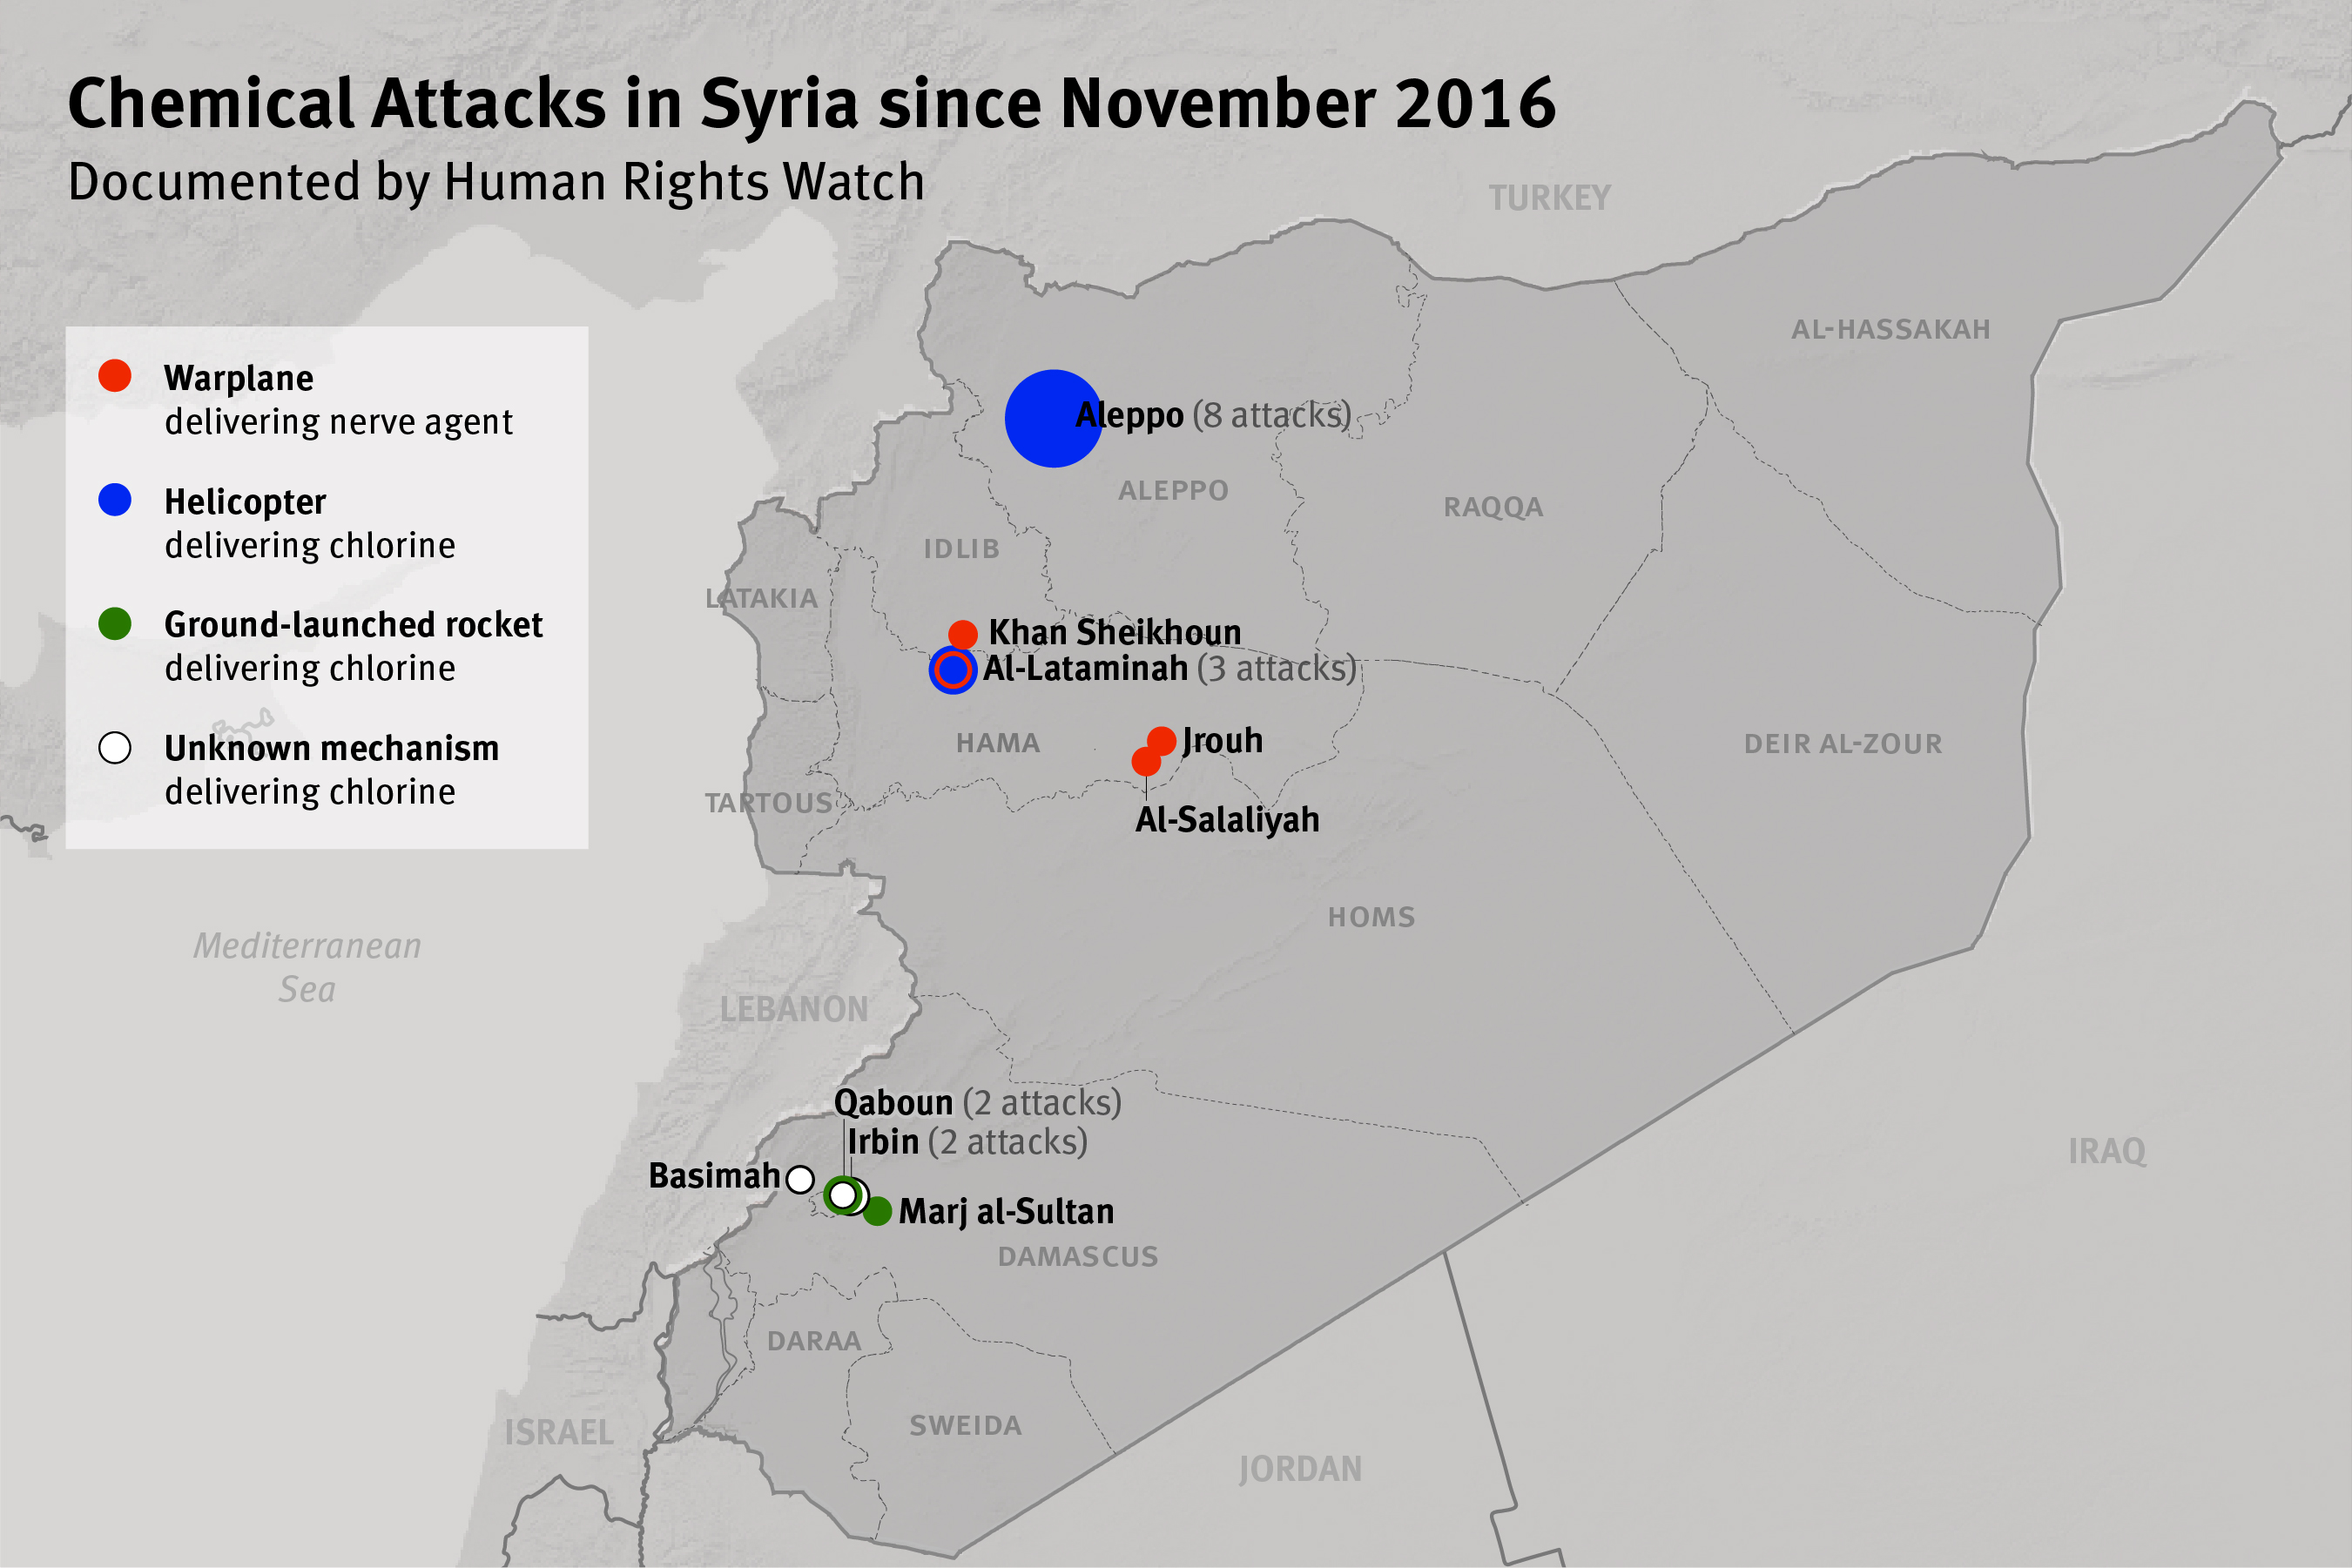 Map of Chemical Attacks in Syria since November 2016